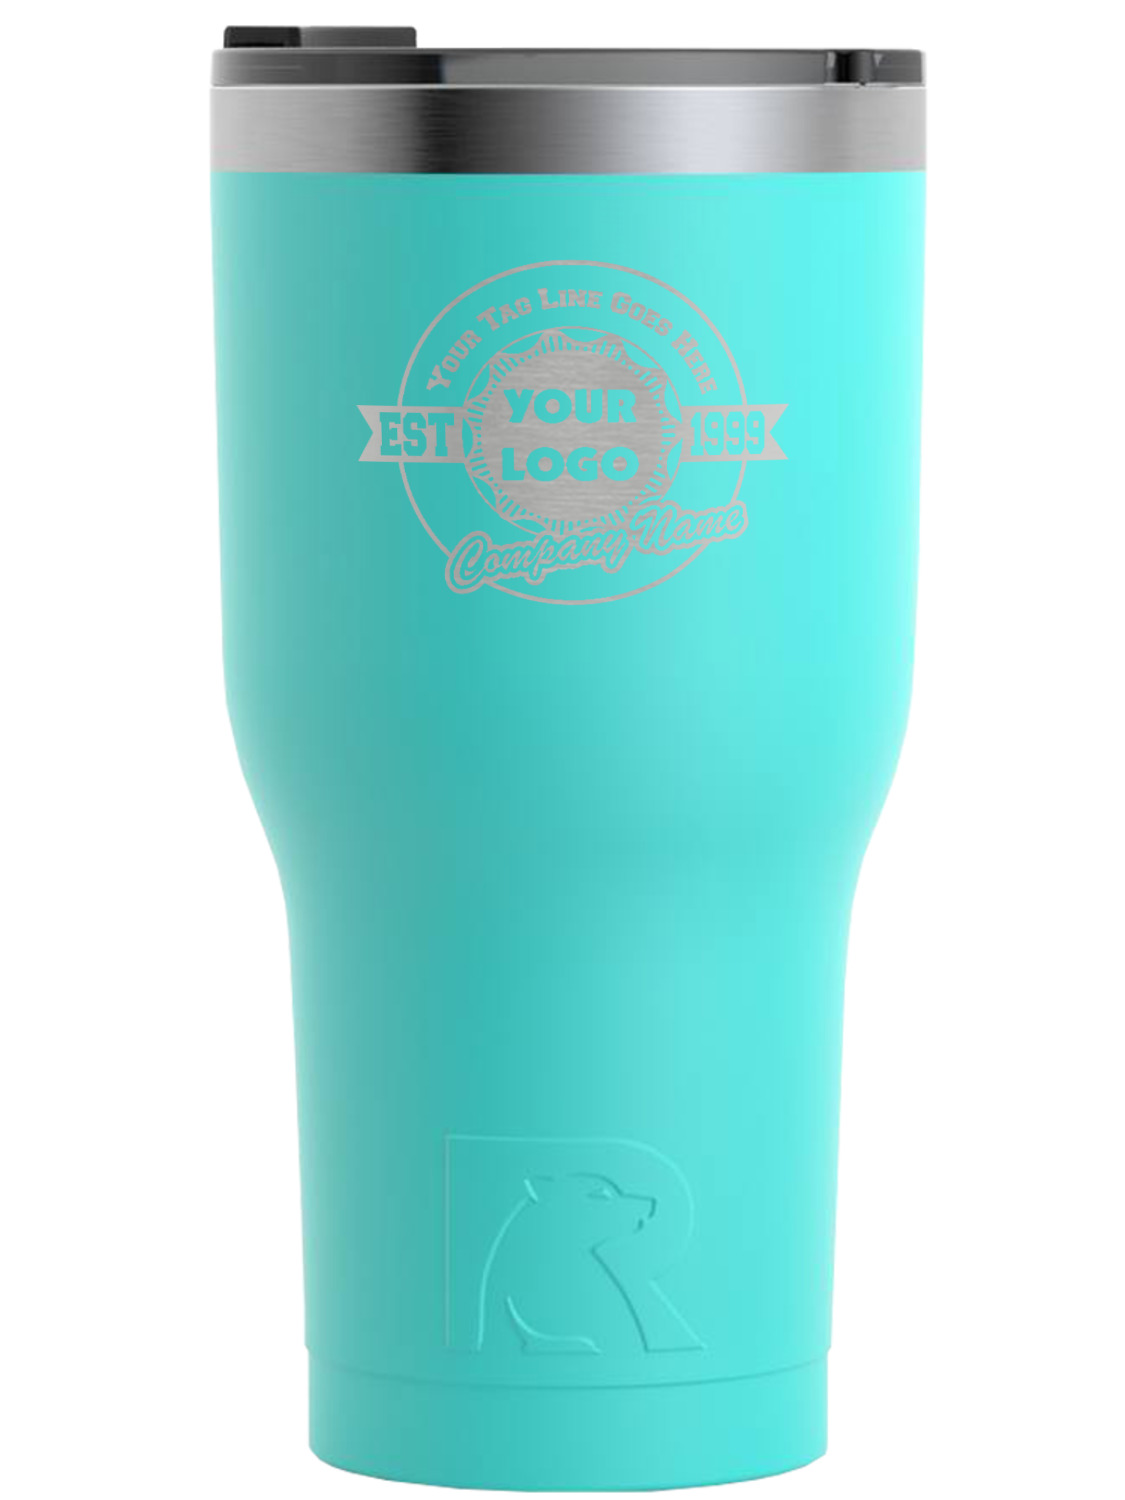 https://www.youcustomizeit.com/common/MAKE/1634642/Logo-Tag-Line-Teal-RTIC-Tumbler-Front.jpg?lm=1688678423